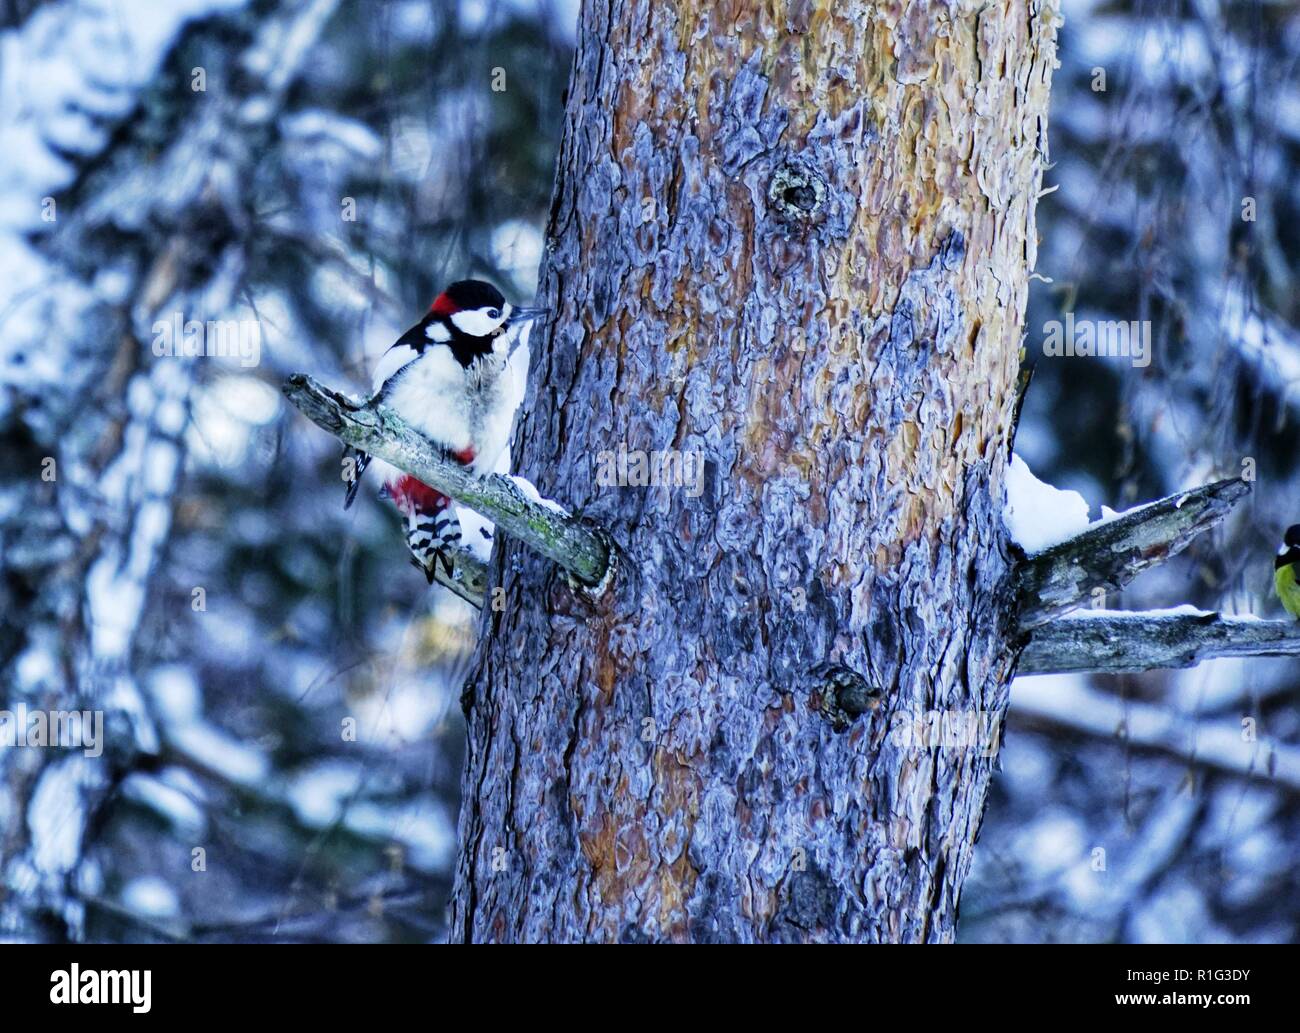 The great spotted woodpecker (Dendrocopos major) is a medium sized woodpecker with pied black and white plumage and a red patch on the lower belly on  Stock Photo